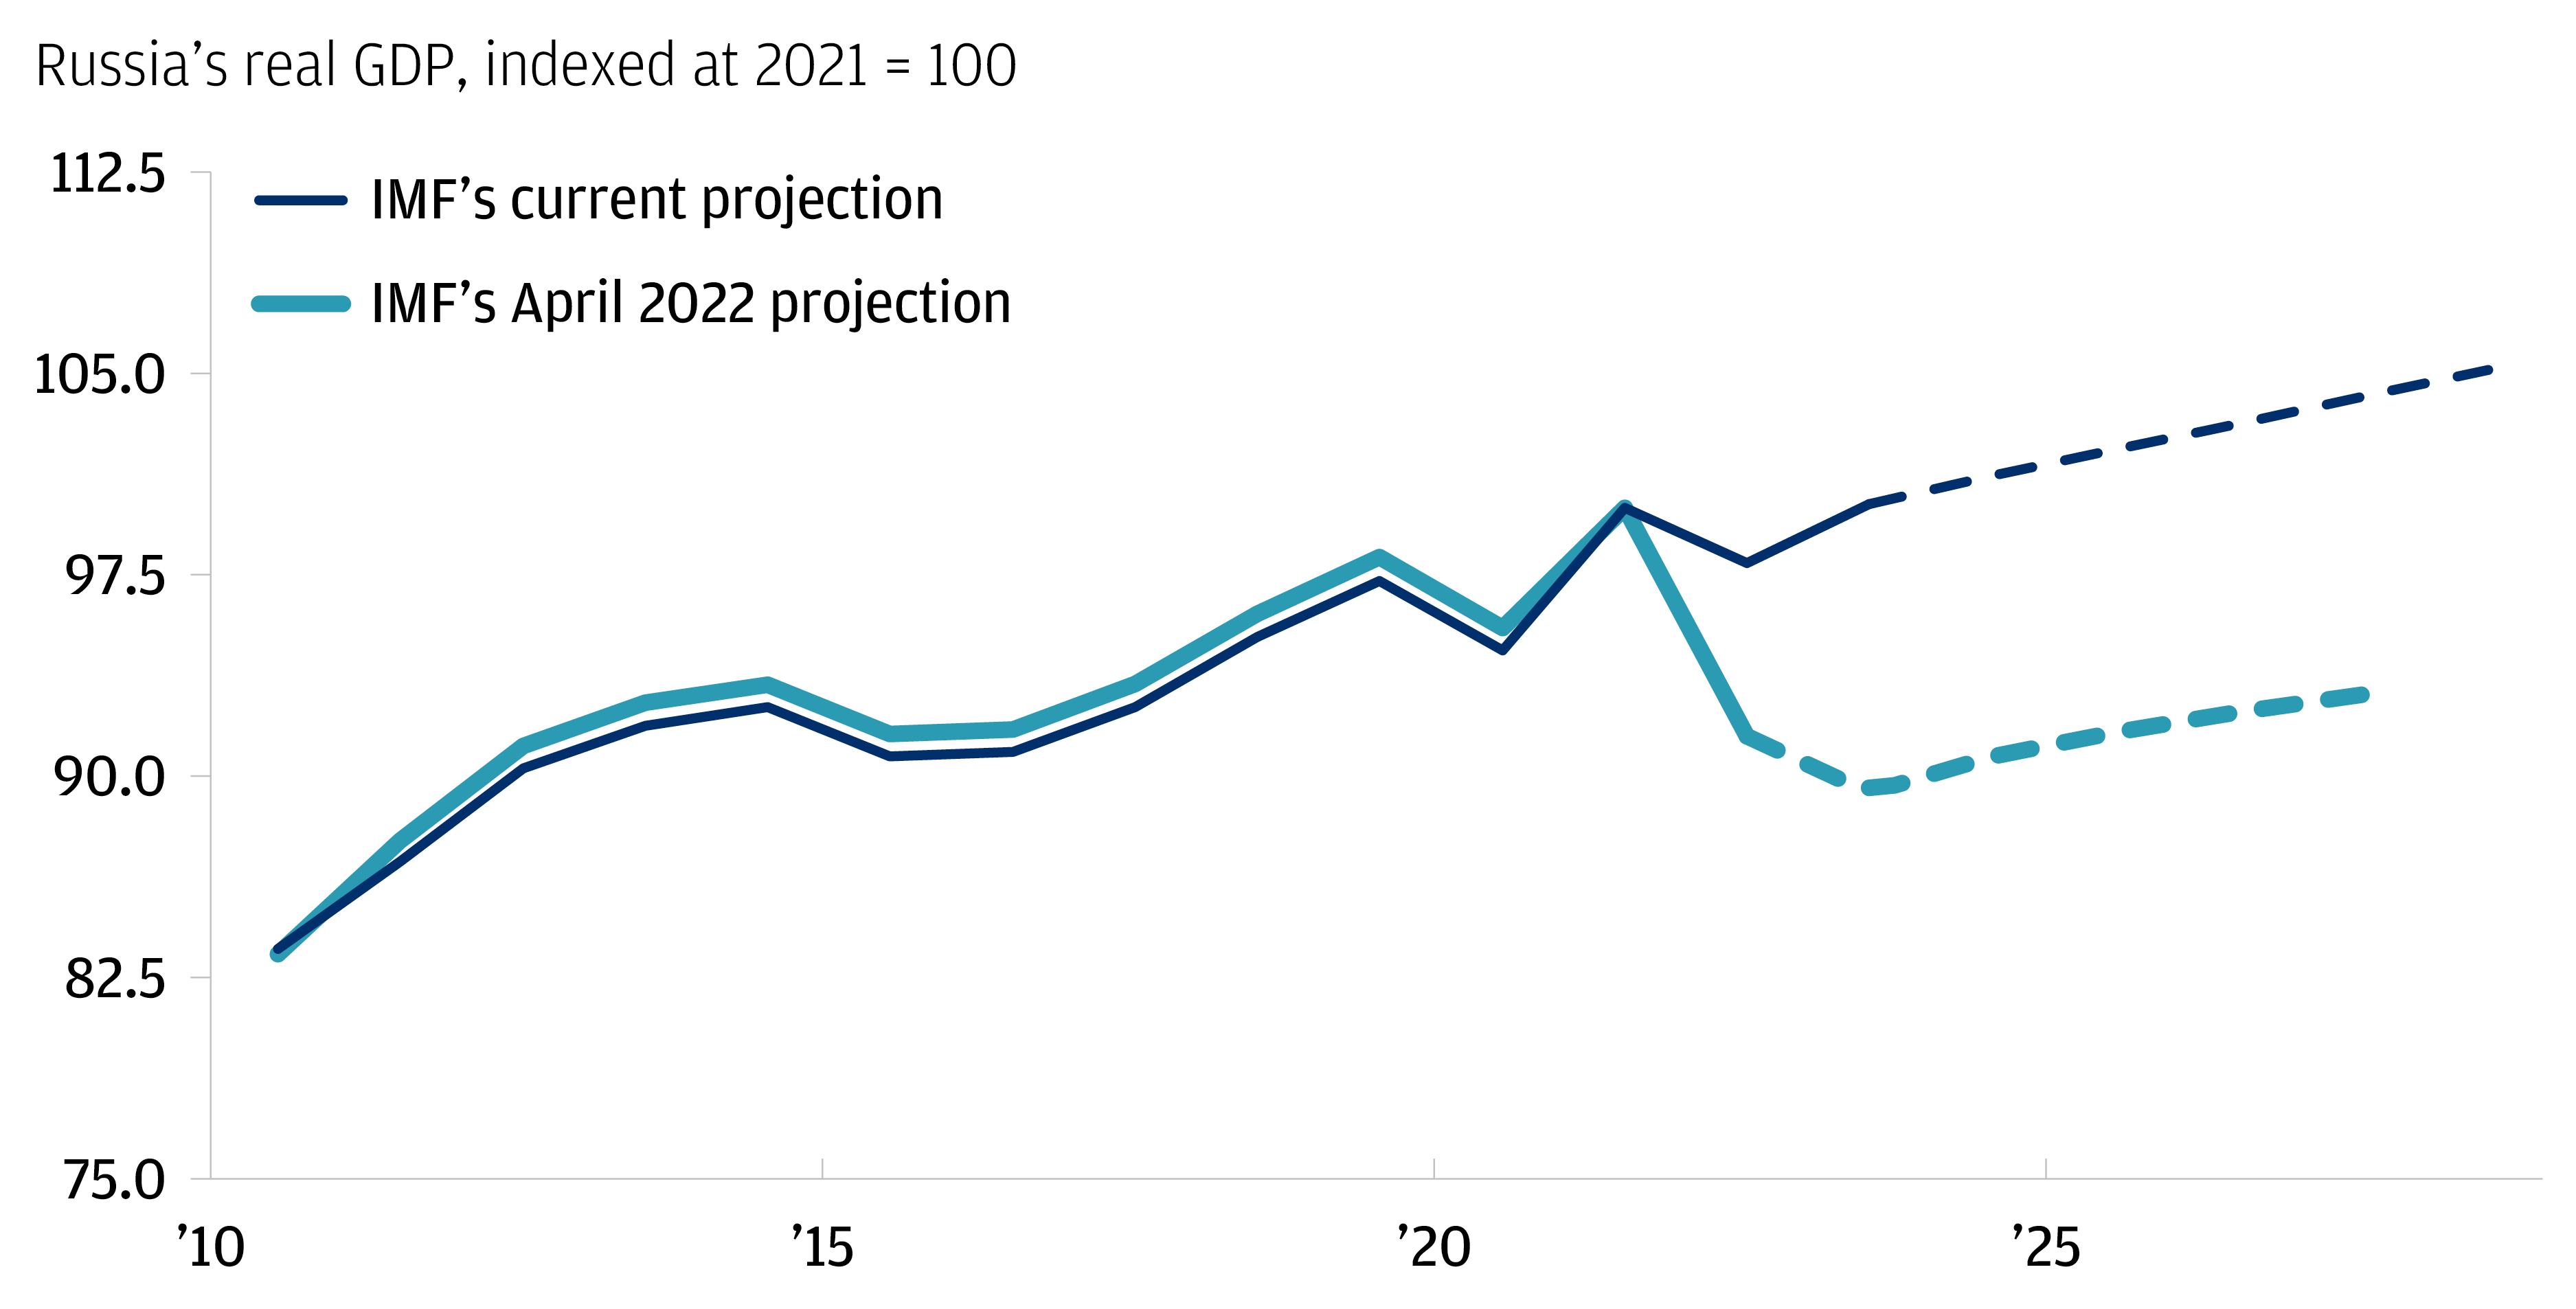 The chart describes Russia’s real GDP indexed at 2021=100 according to IMF current projection versus IMF’s April 2022 projection. 